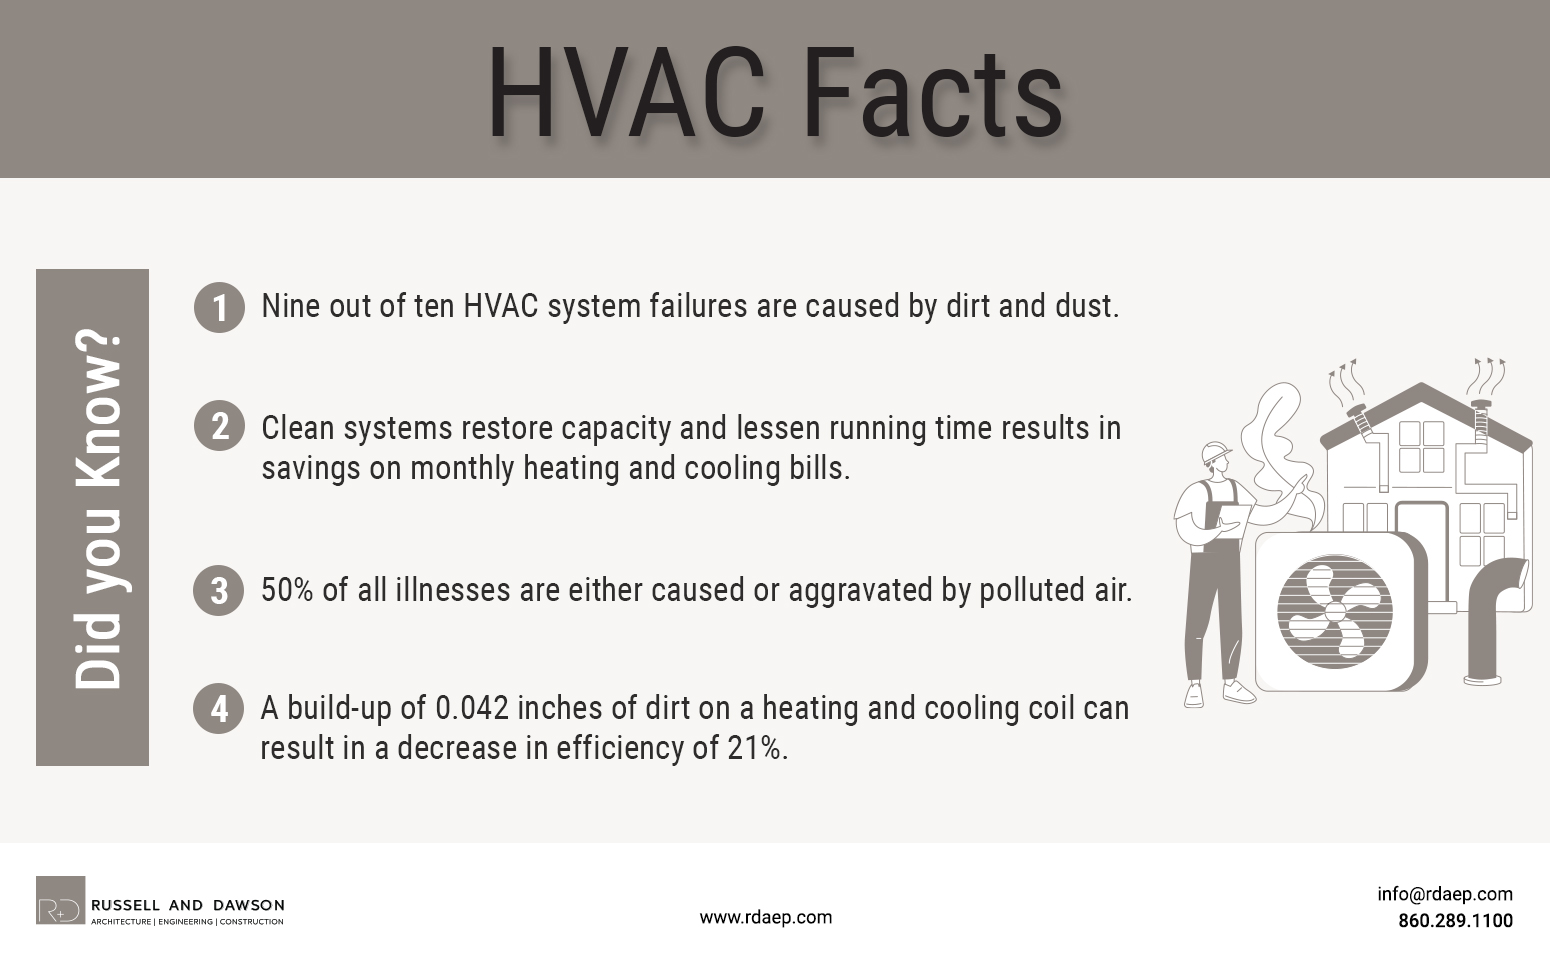 Russell and Dawson Inc. HVAC facts